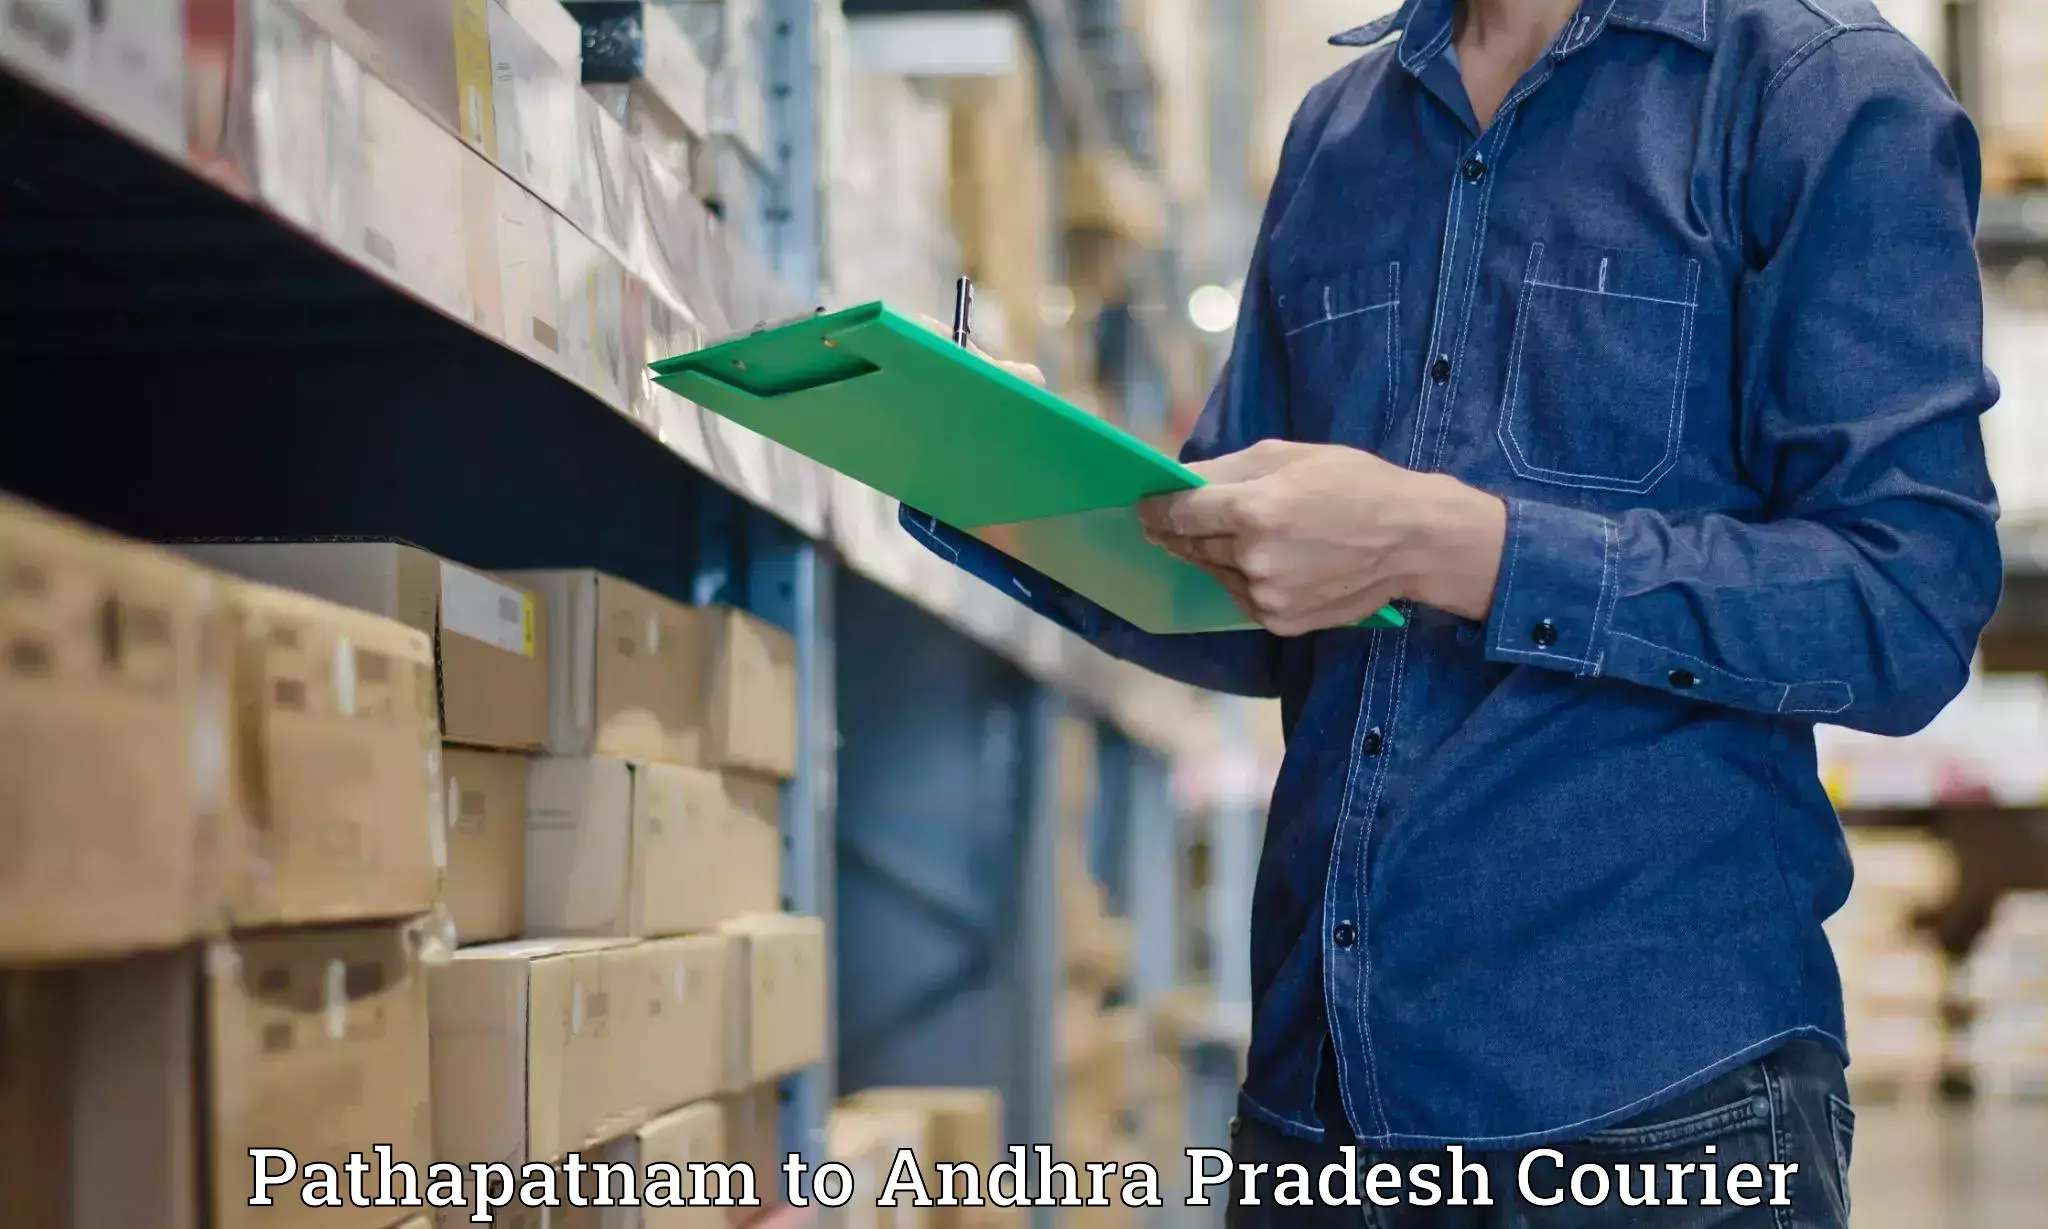 Fast-track shipping solutions Pathapatnam to Visakhapatnam Port